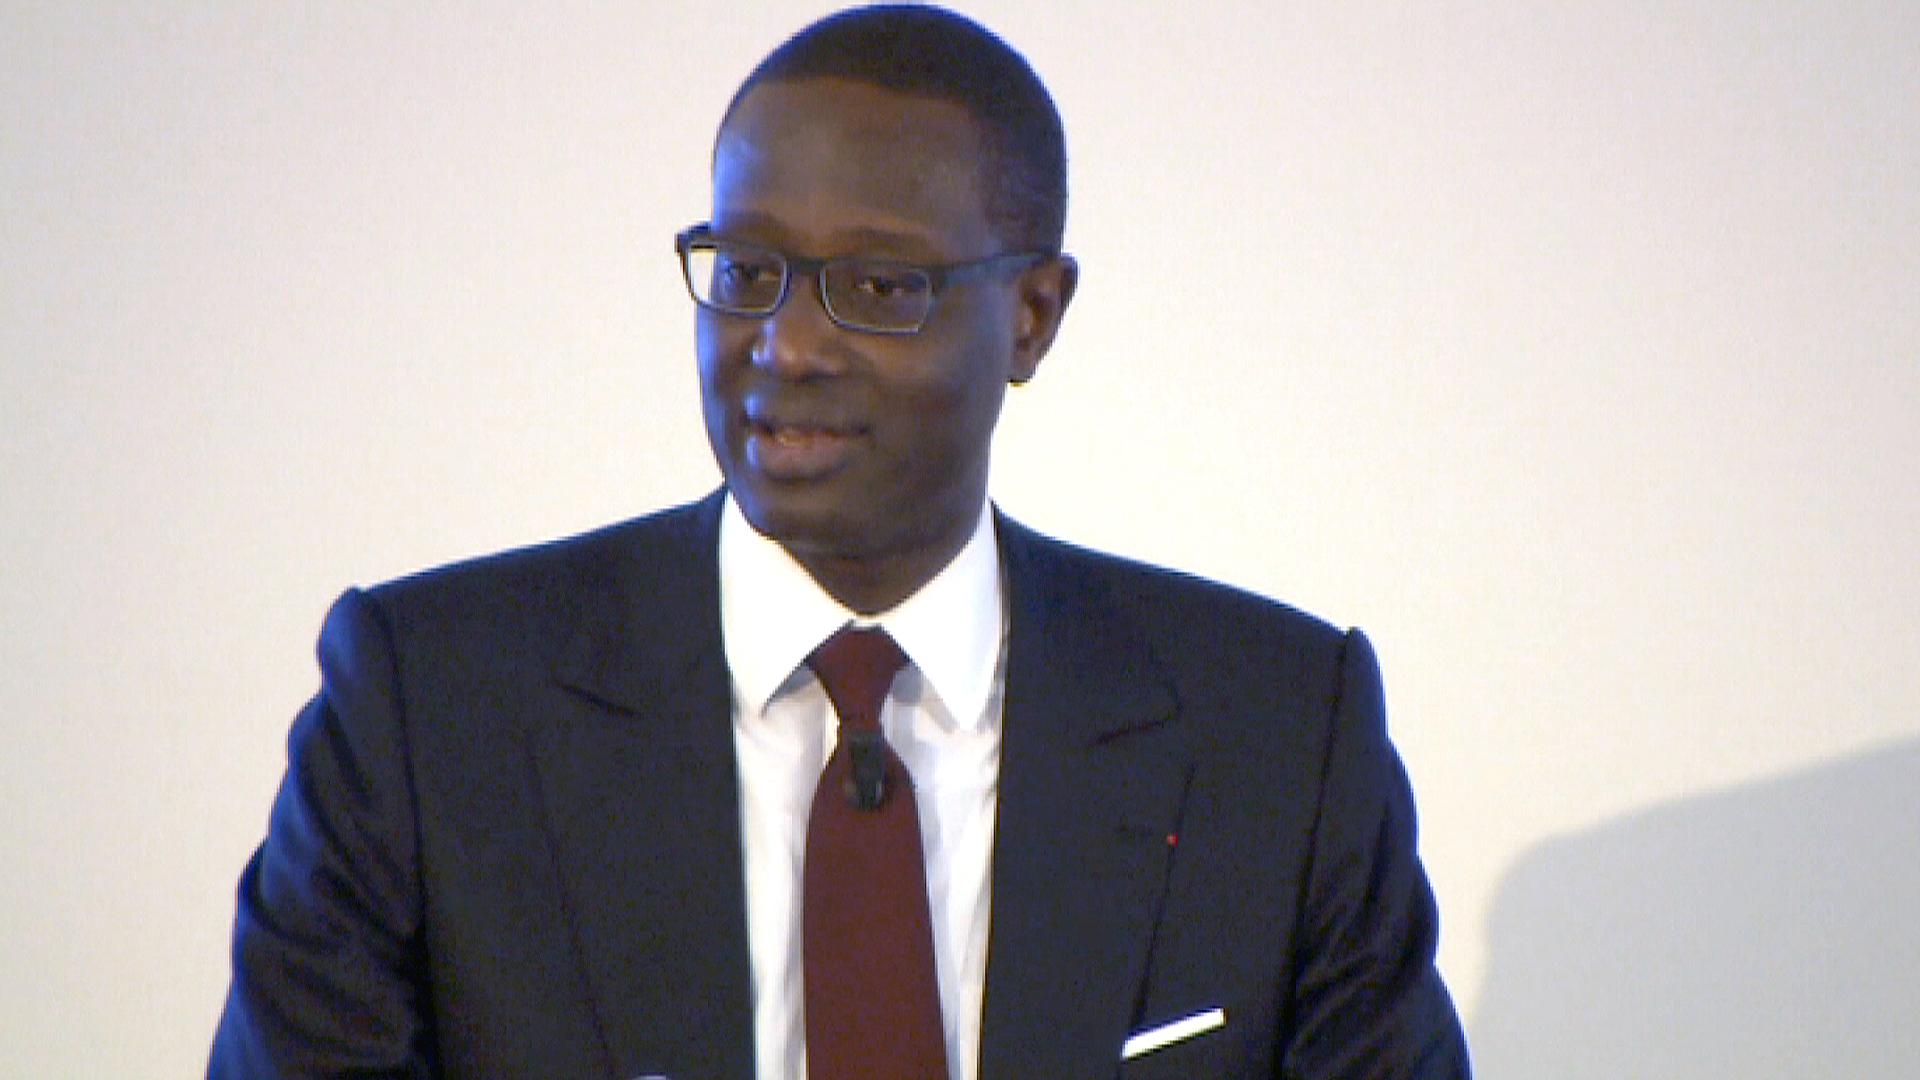 Tidjane Thiam, the new CEO of Swiss bank Credit Suisse